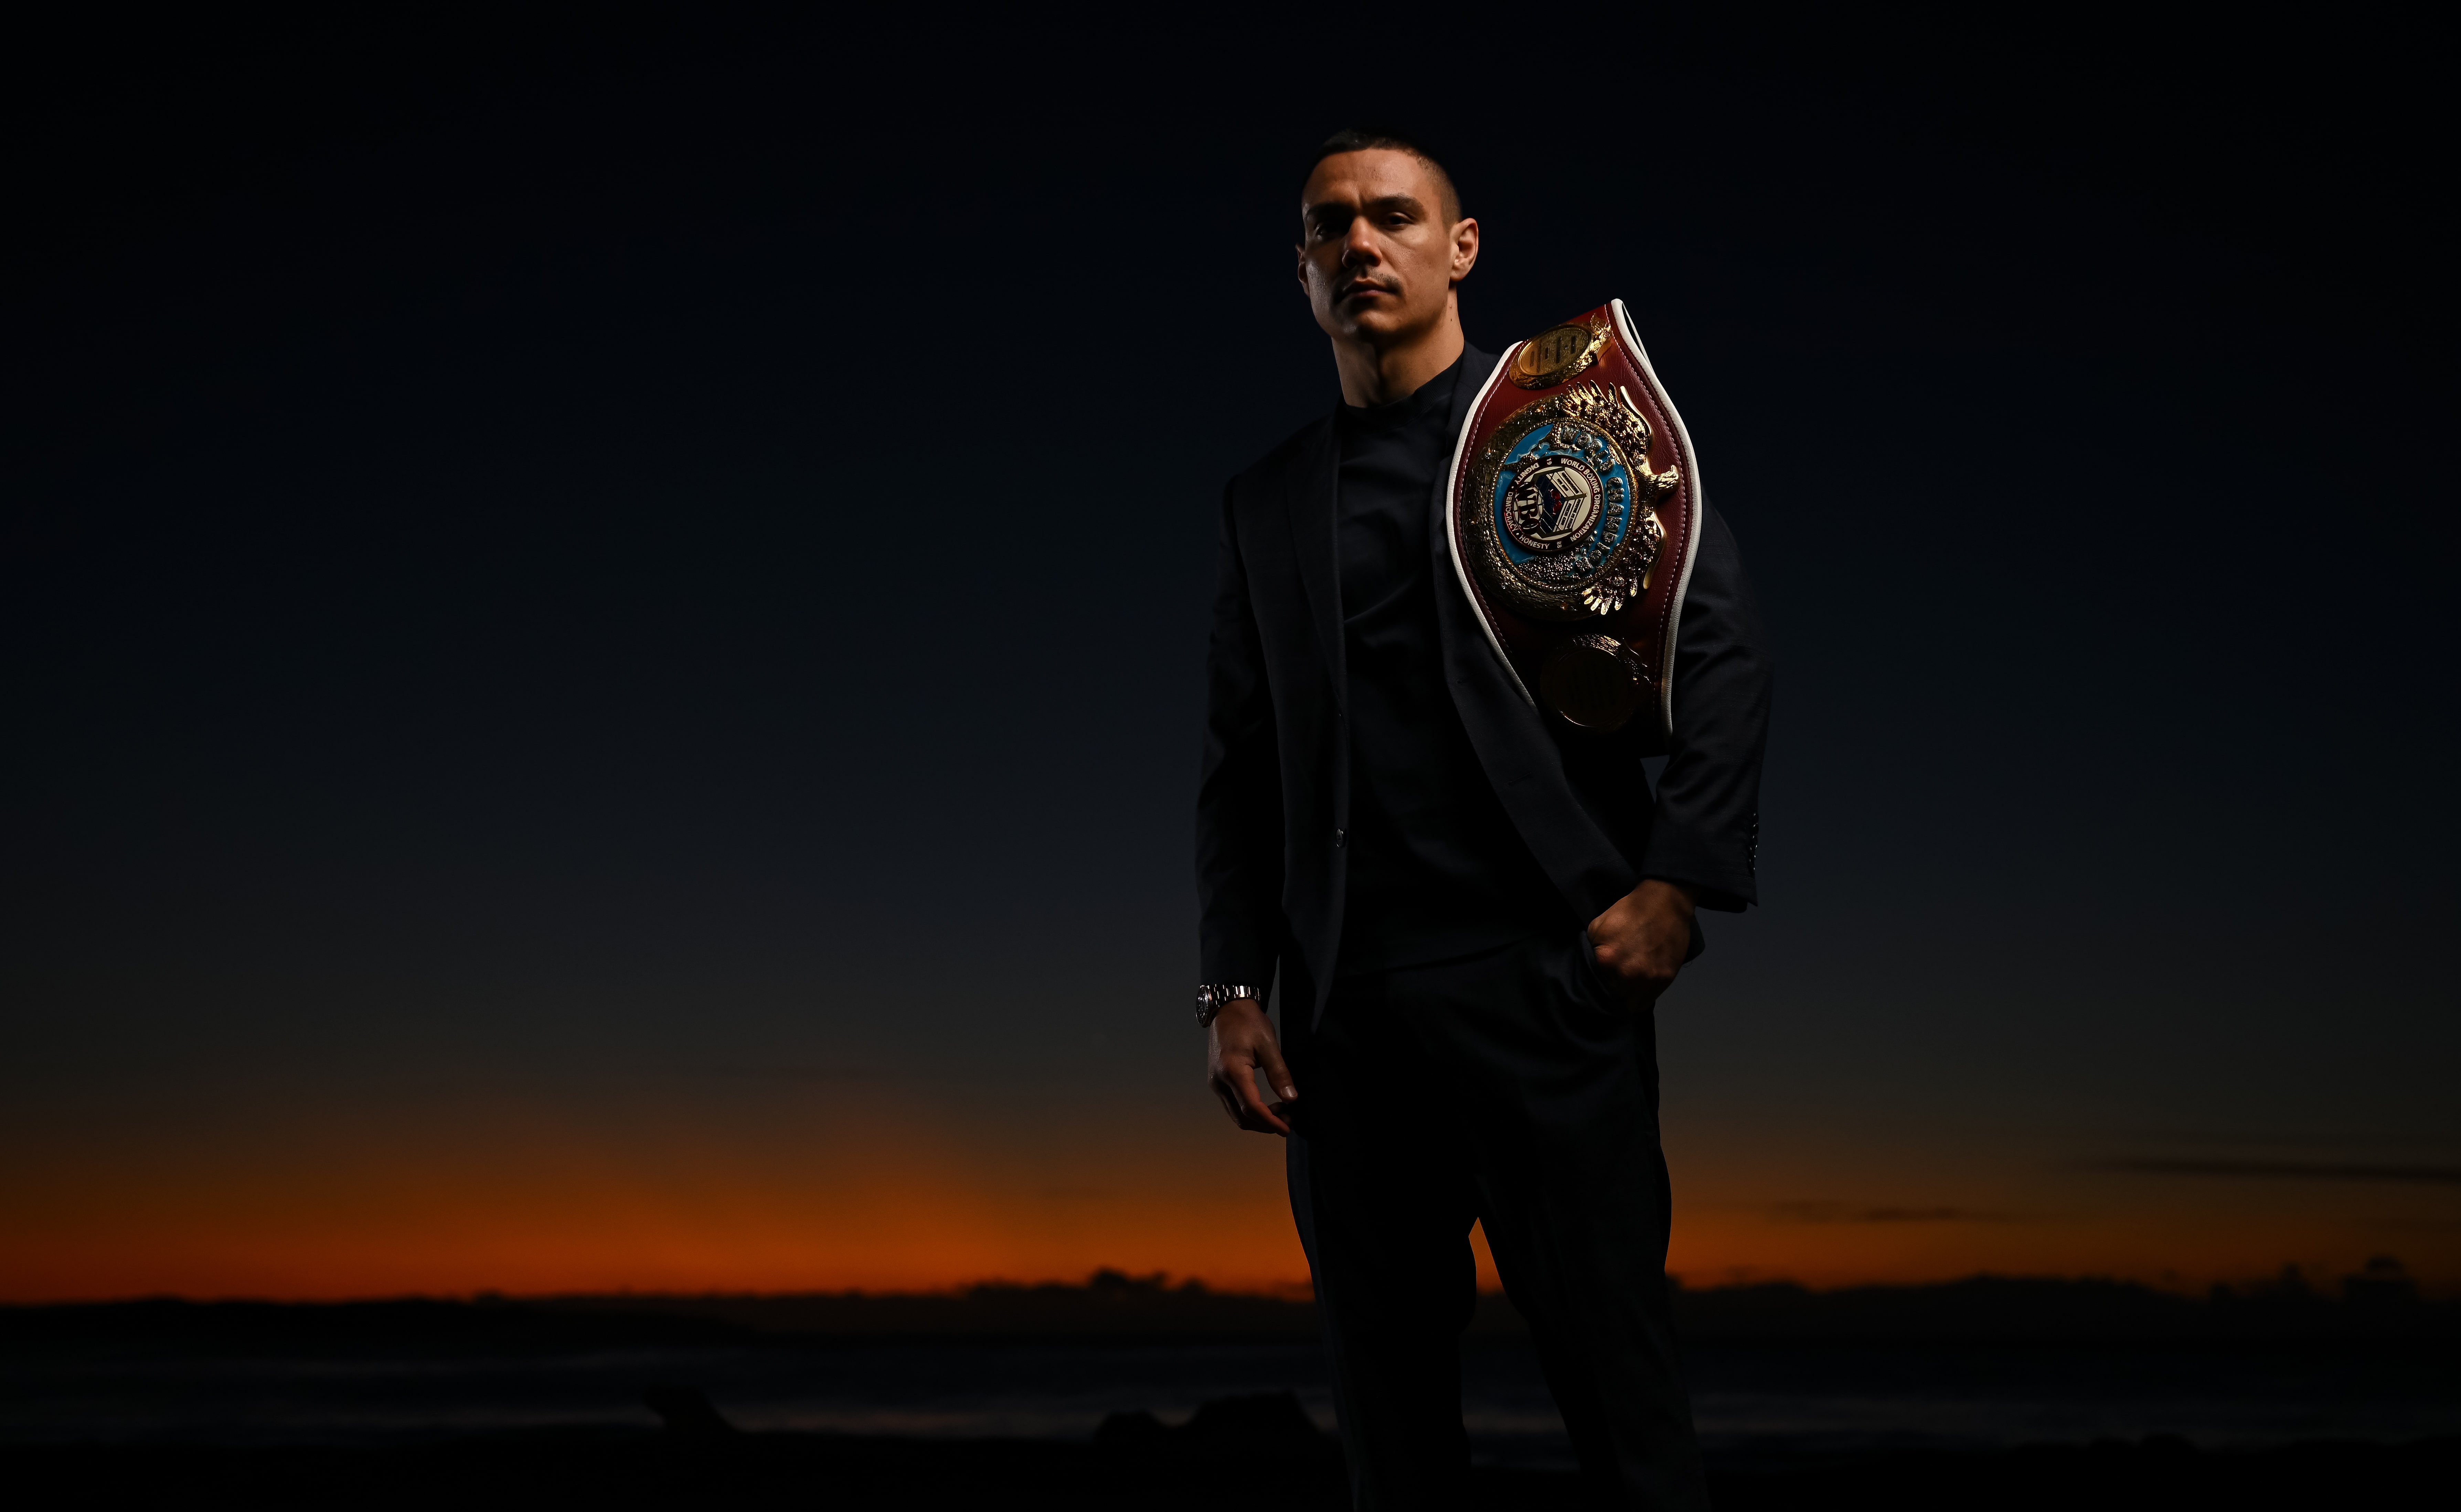 Tszyu-Mendoza lands at the Gold Coast with help from Government